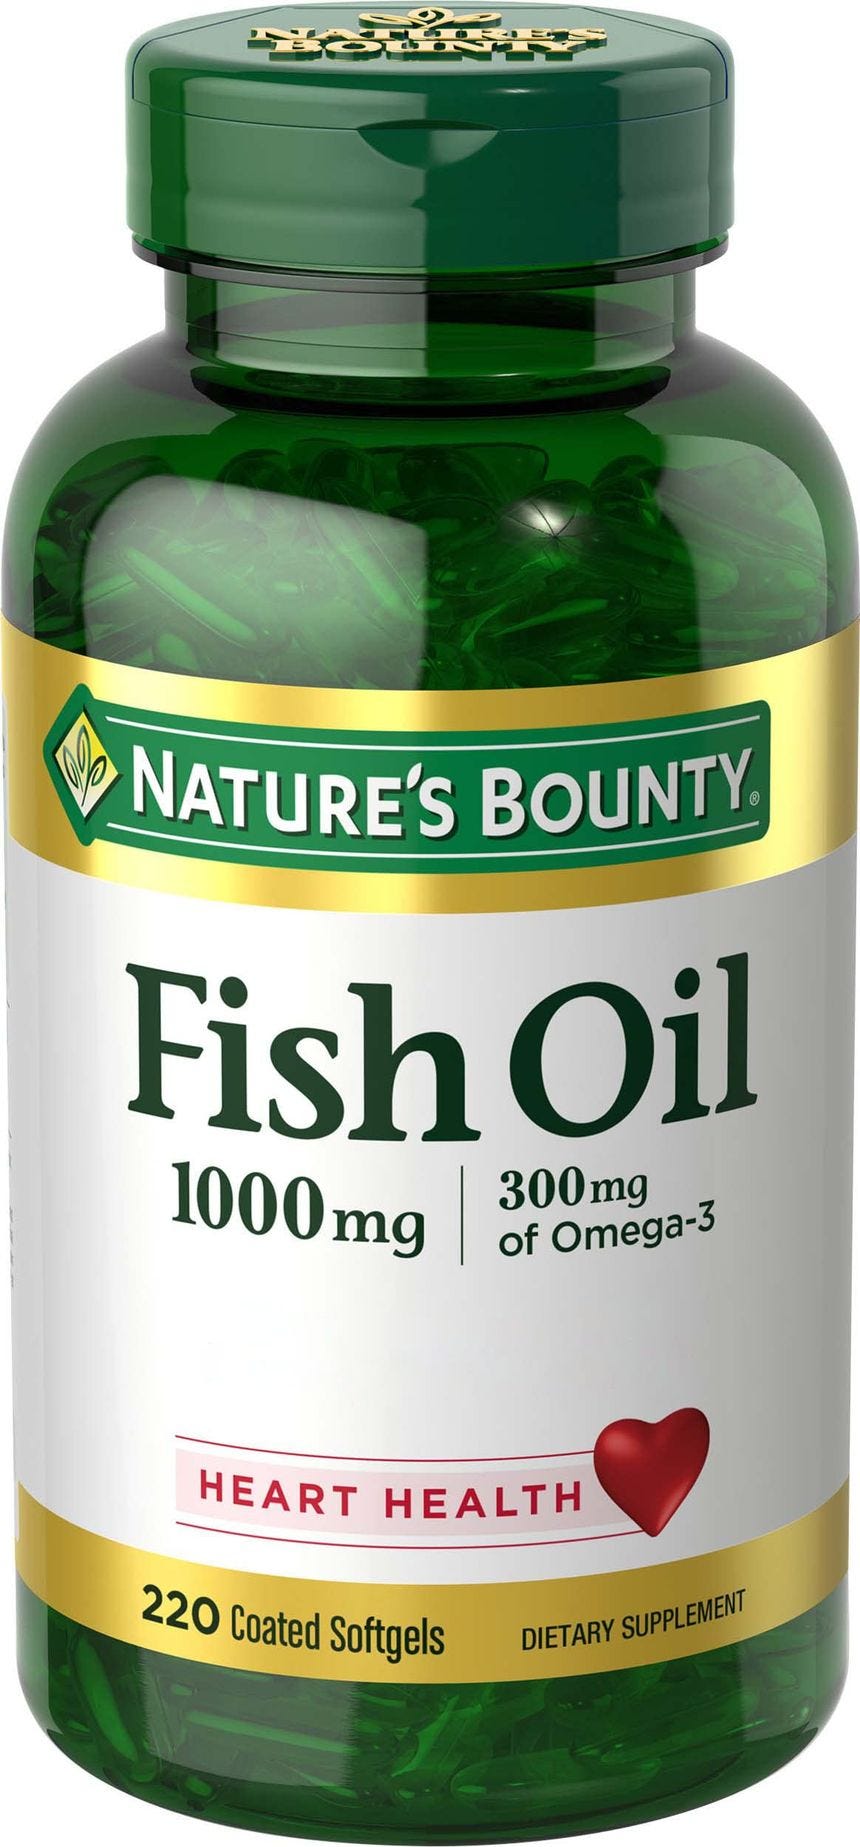 Nature's Bounty Fish Oil, Dietary Supplement, Omega 3, Supports Heart Health, 1000 Mg, 220 Coated Softgels